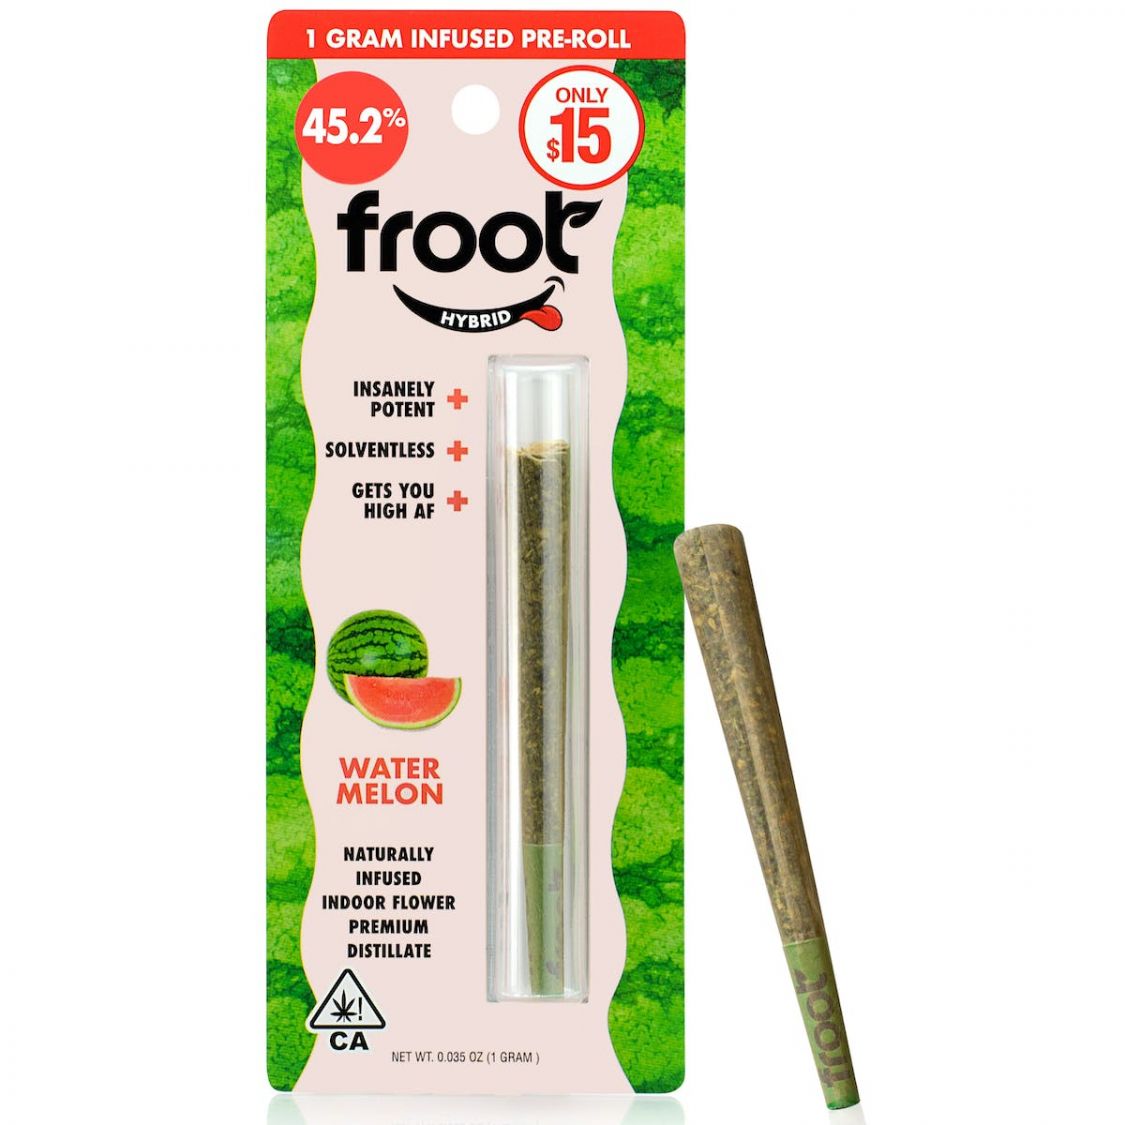 Froot Watermelon Infused Pre-Roll Pre-rolls Infused Pre-Rolls